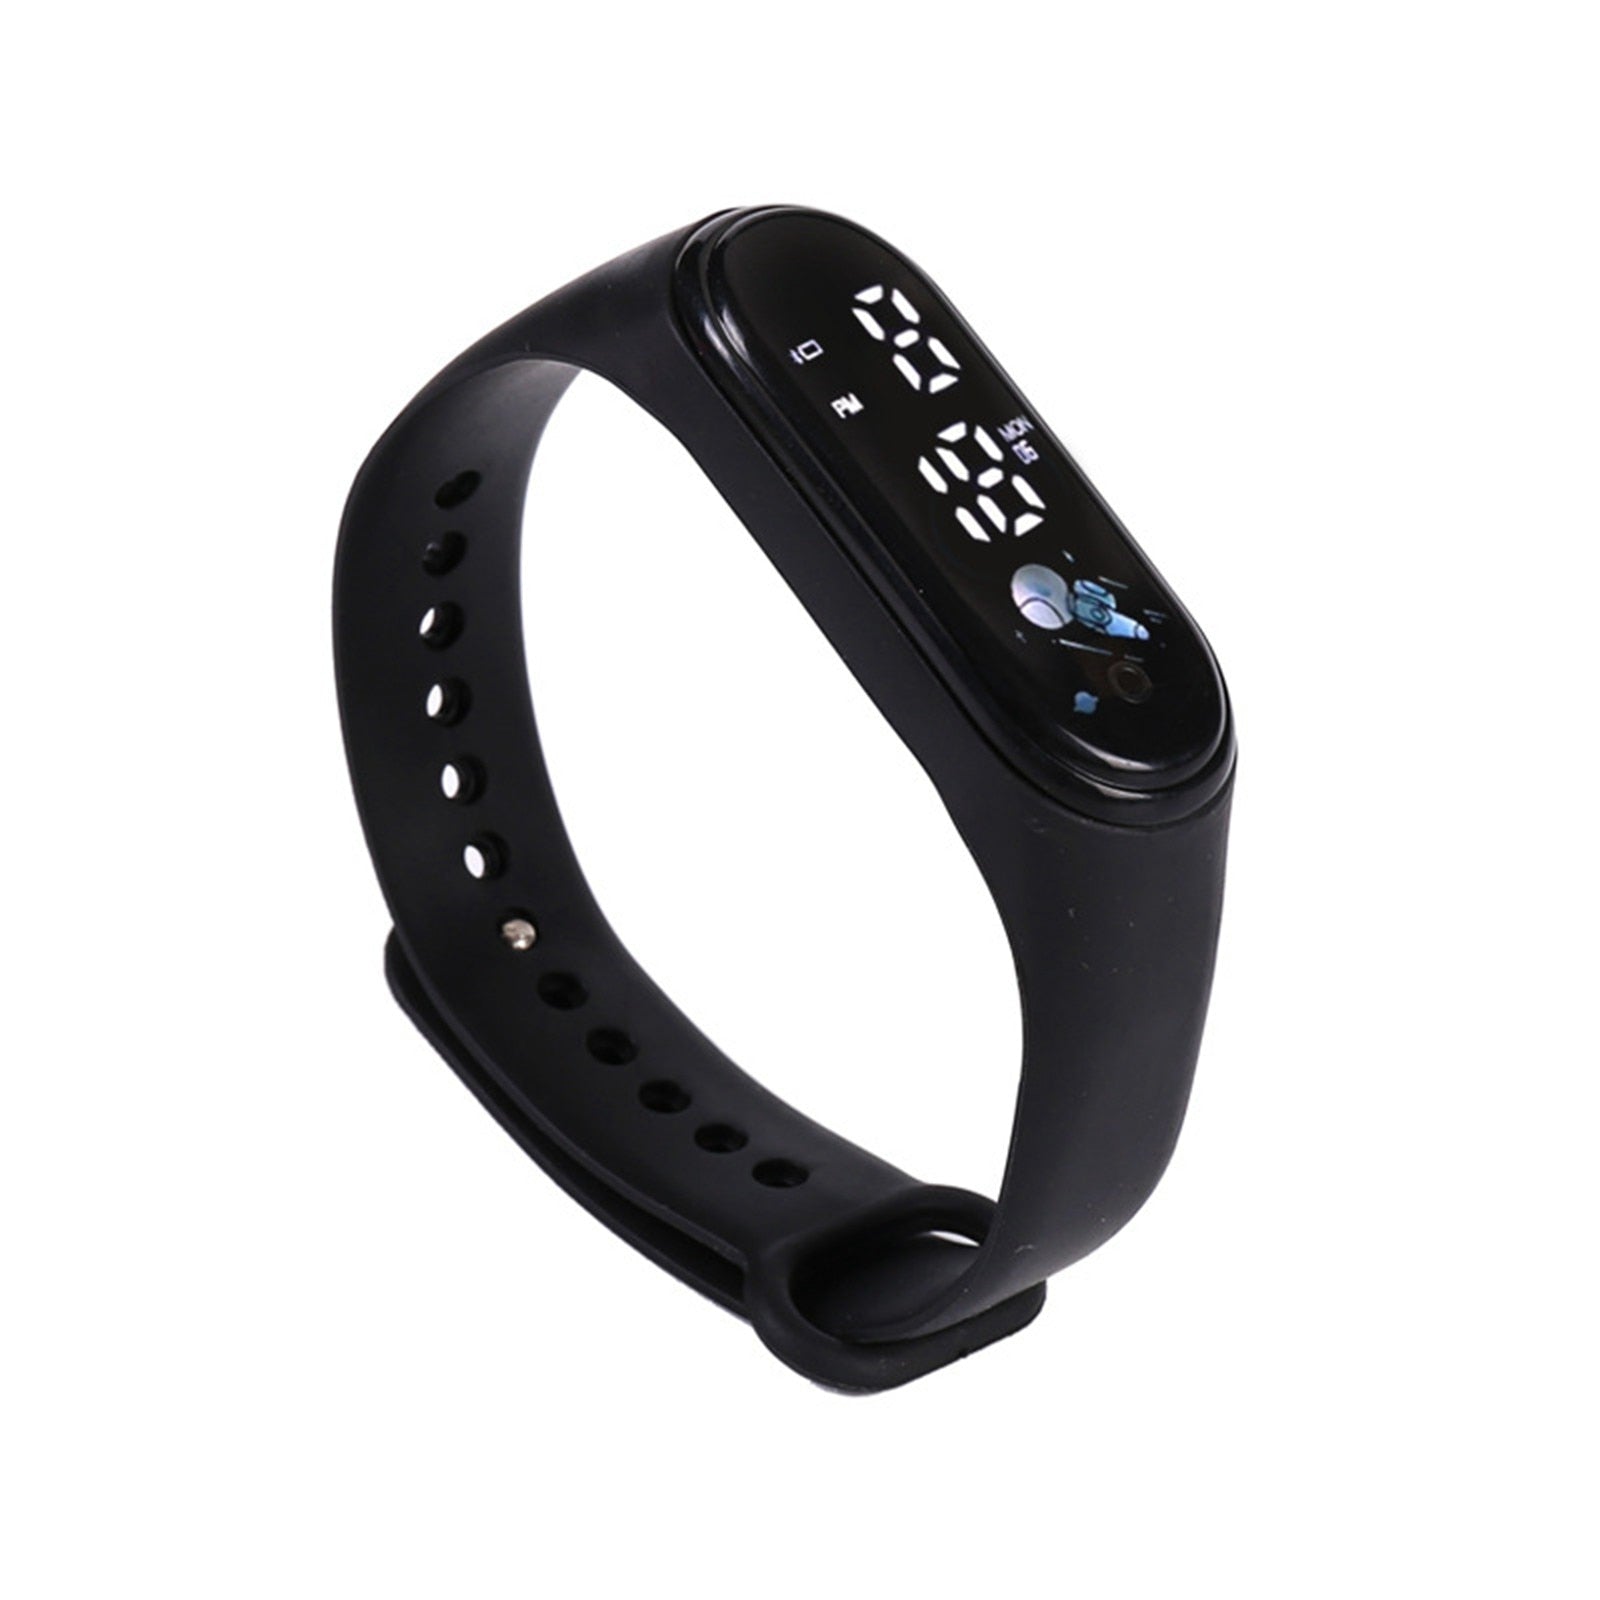 Outdoor LED Clock Number Display Outdoor Sports Digital Wrist Watch - Afro Fashion Hive